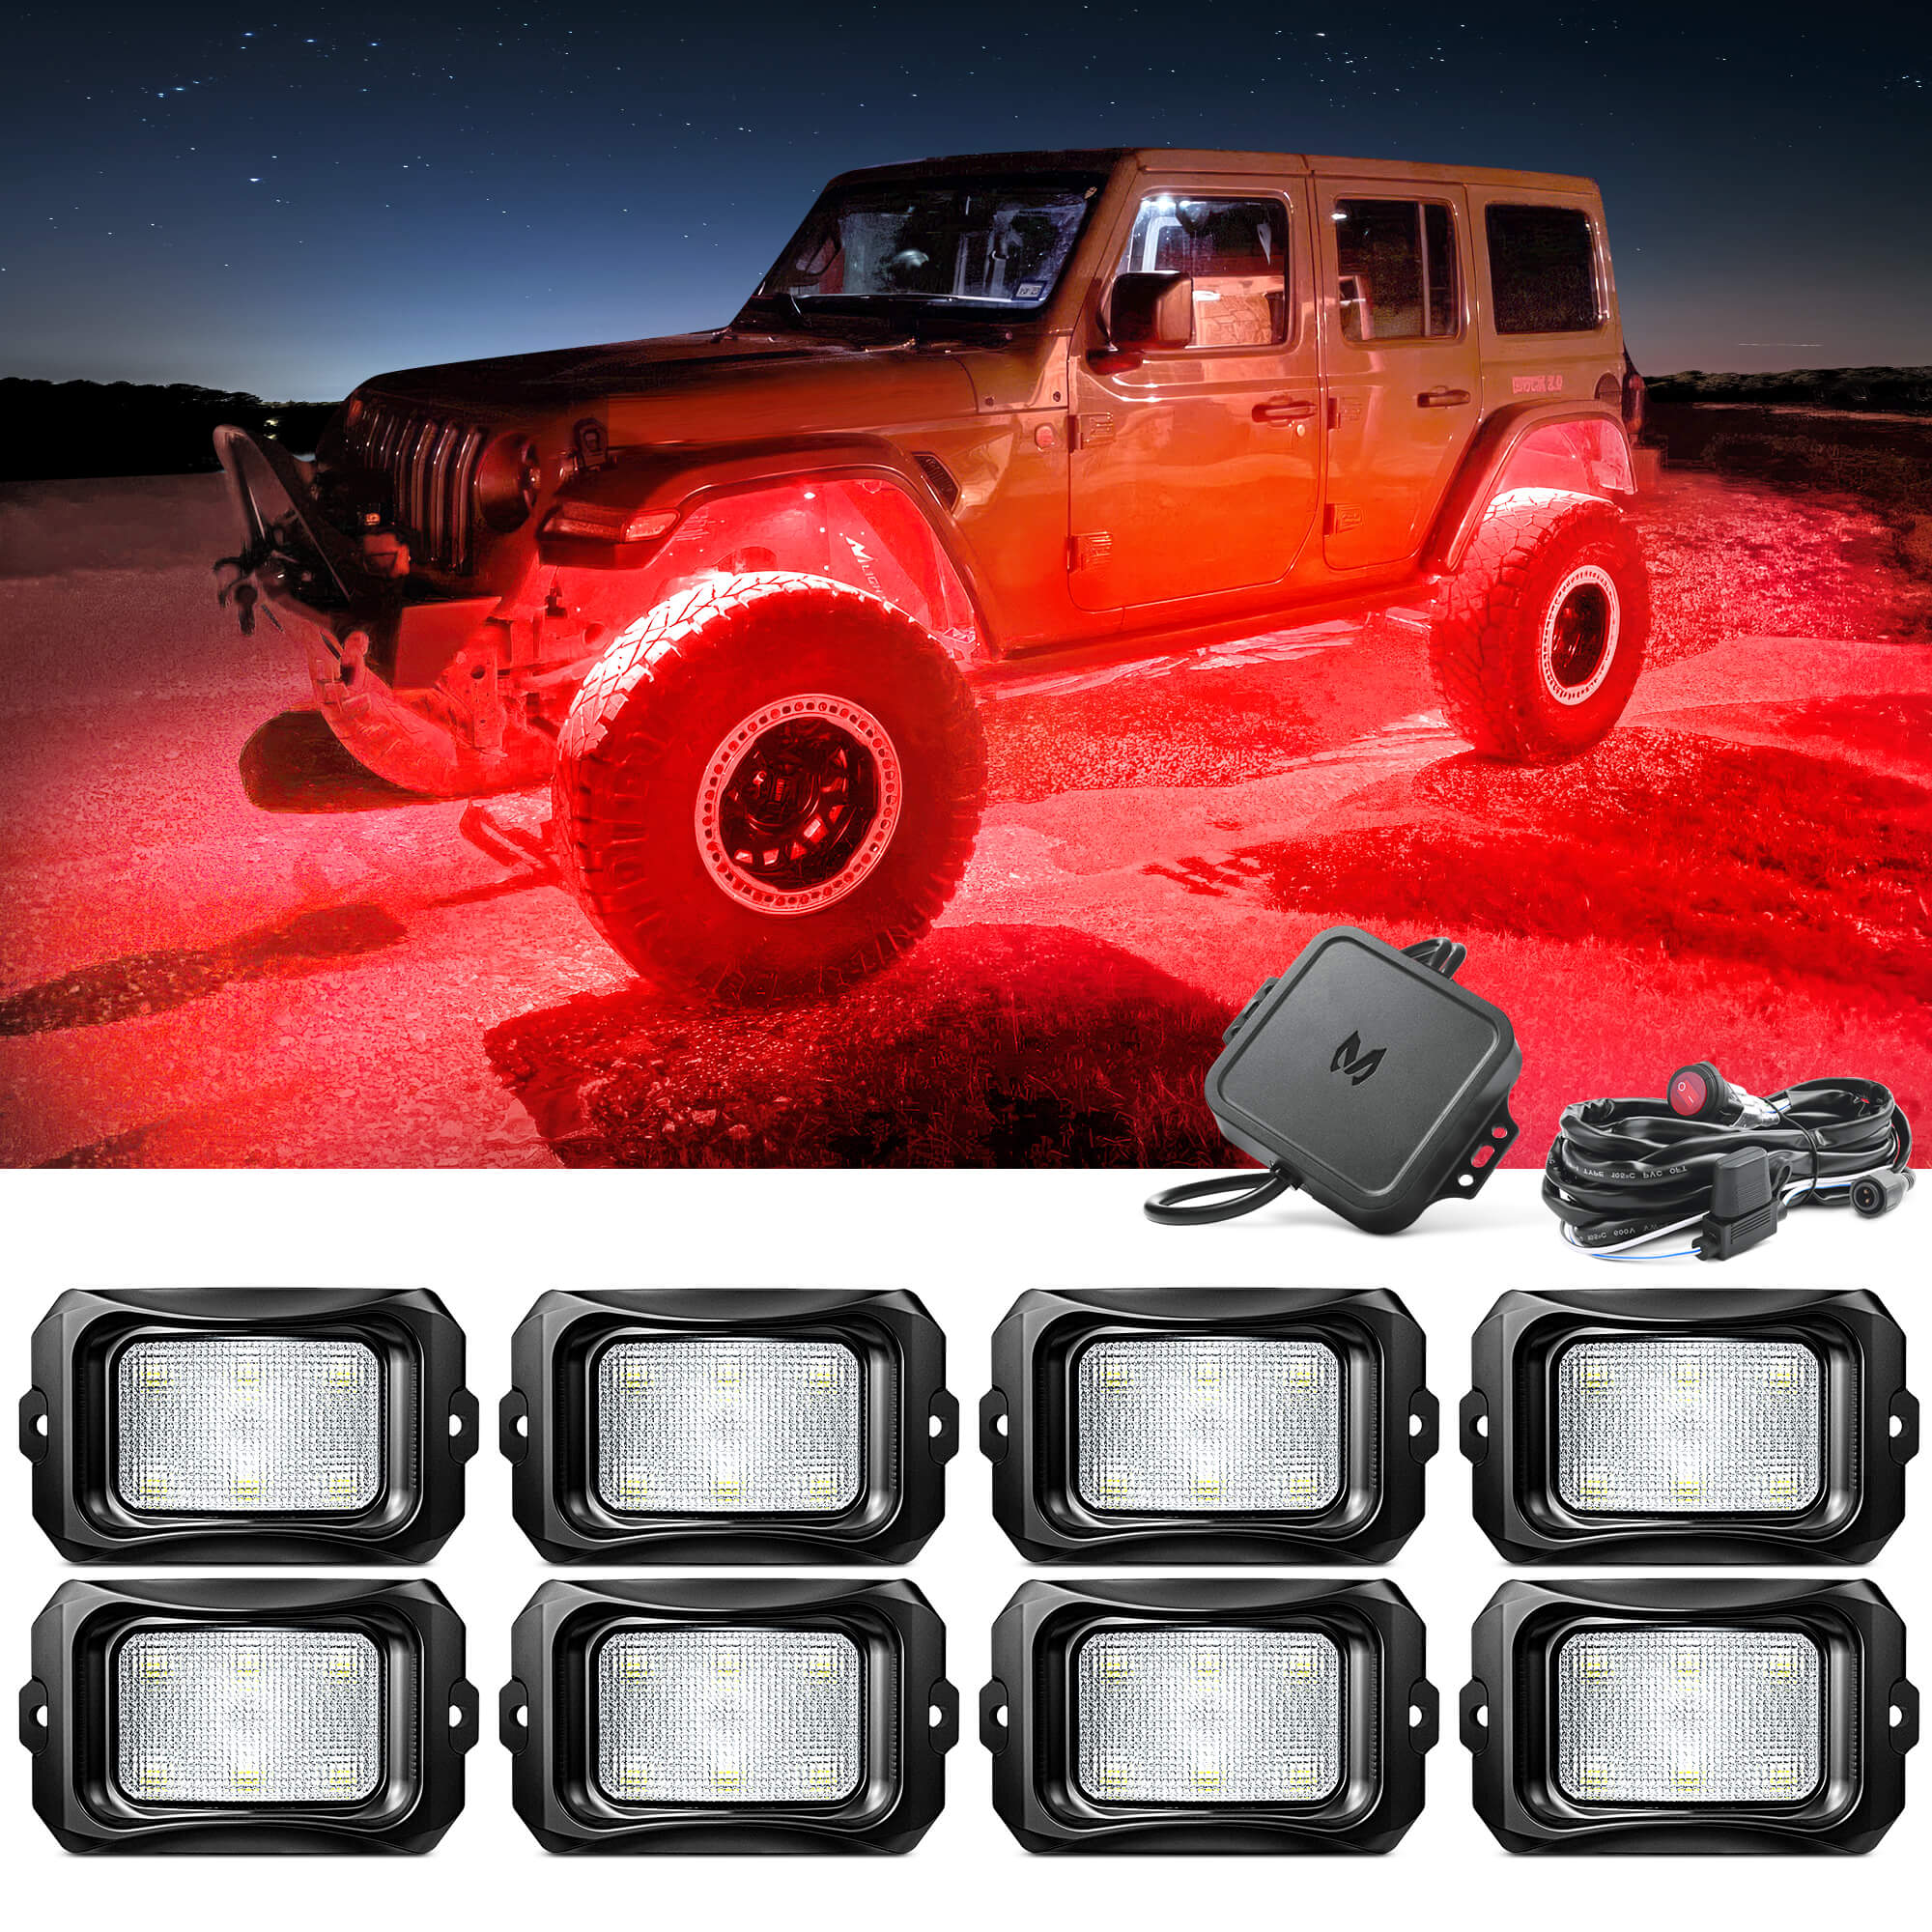 MICTUNING C2 RGBW Rock Lights Exclusive 8 pods LED Curved